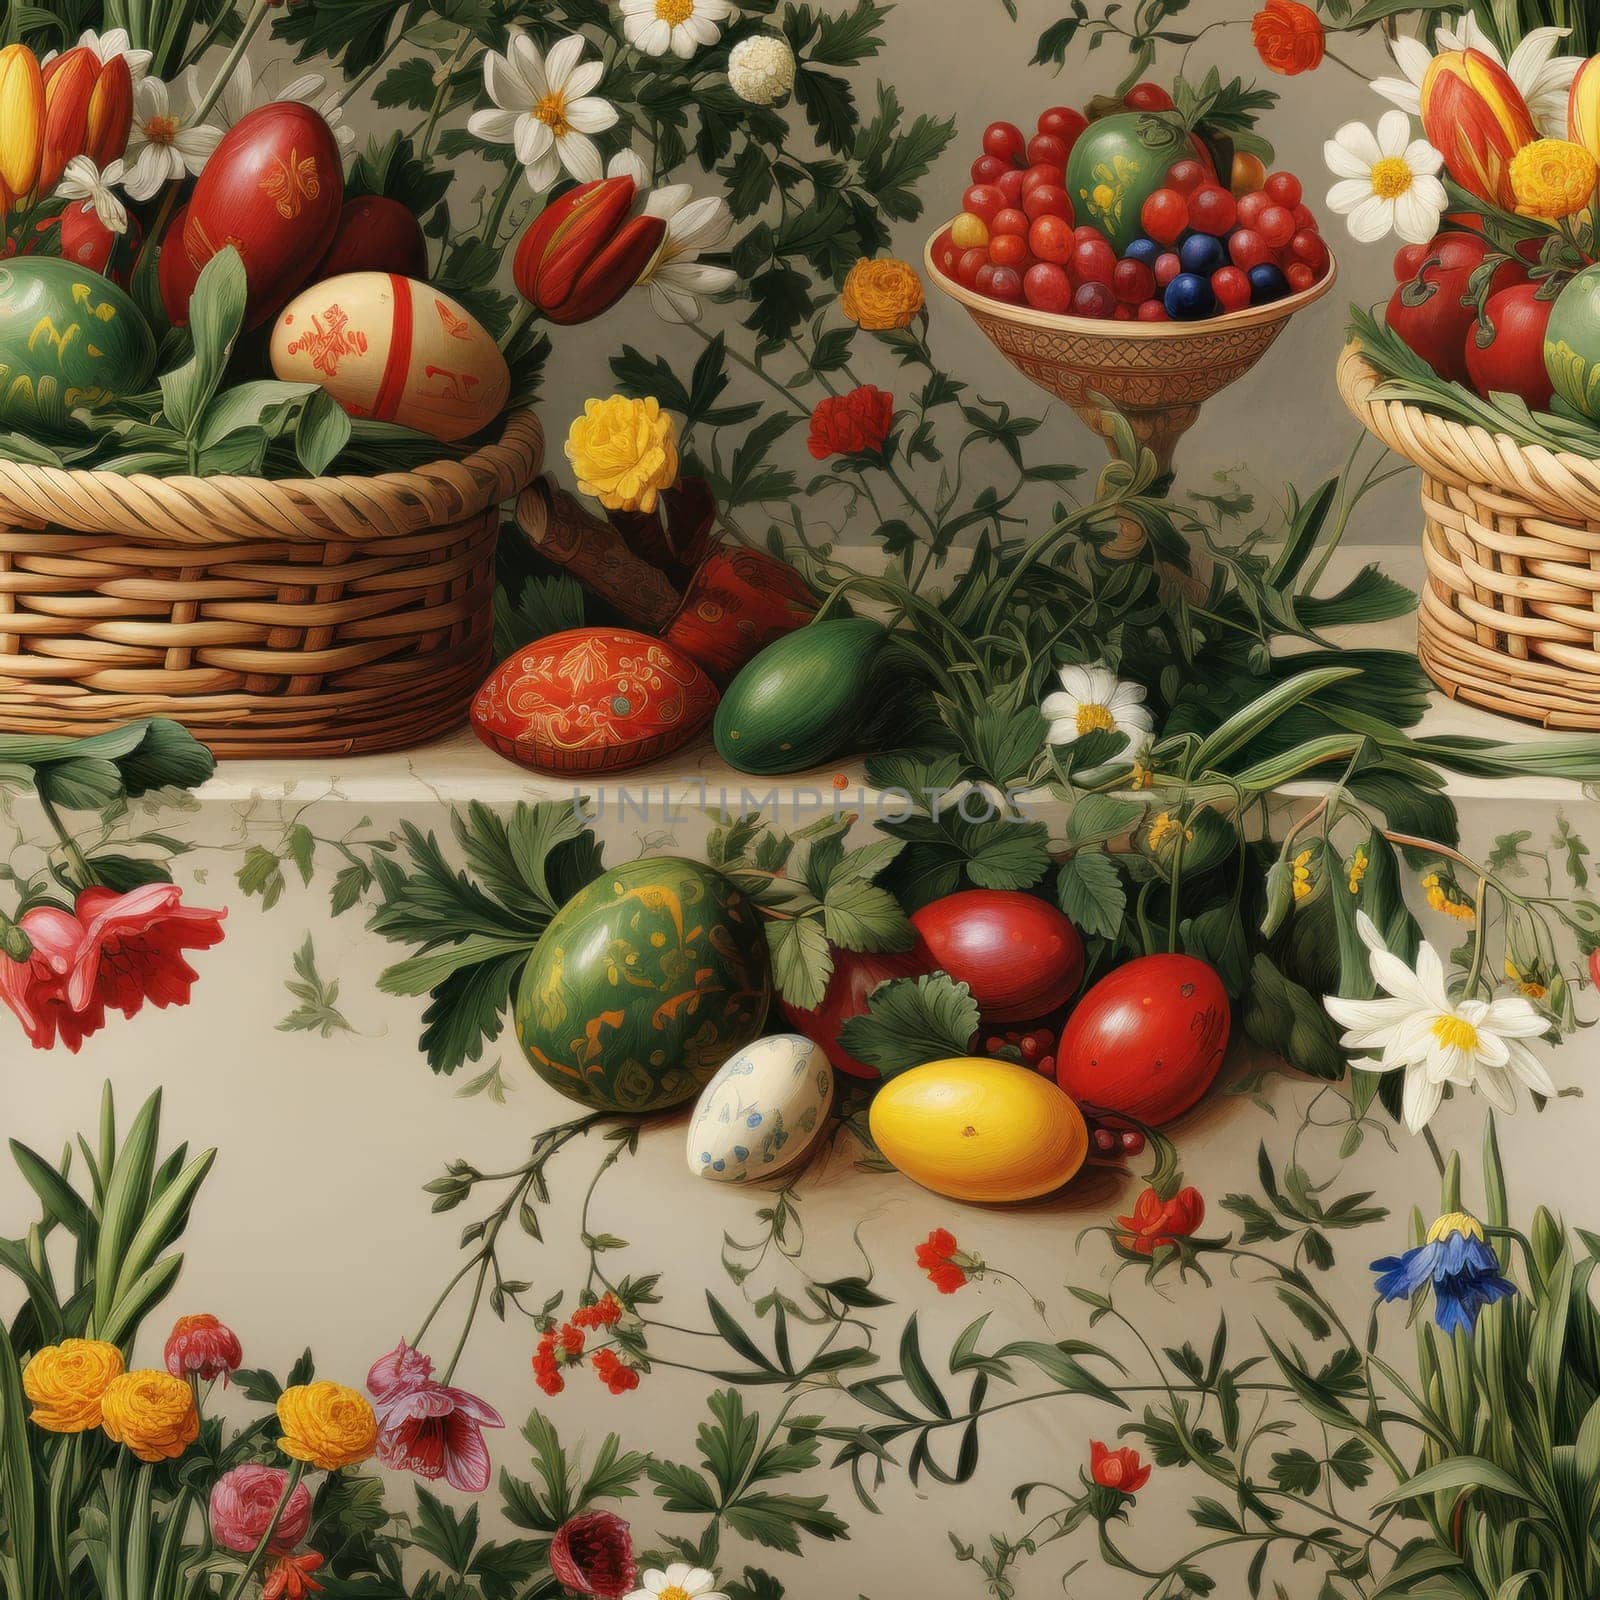 A painting of a table with baskets full of flowers and eggs